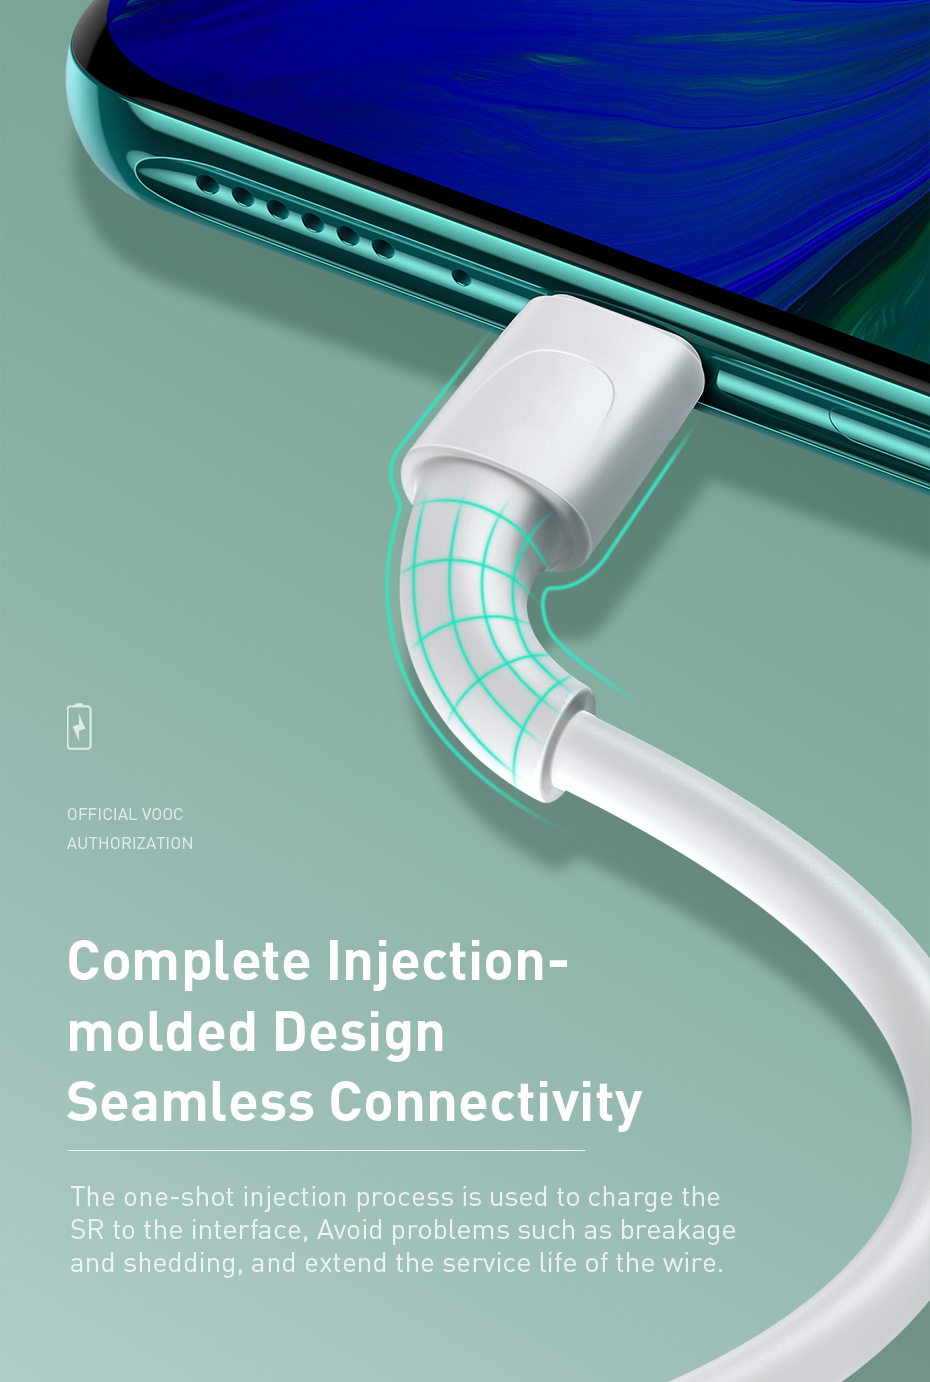 Baseus-5A-Warp-OPPO-VOOC-Certified-USB-Type-C-Cable-Fast-Charging-Data-Sync-Cord-Line-Support-AFCQCF-1706996-10